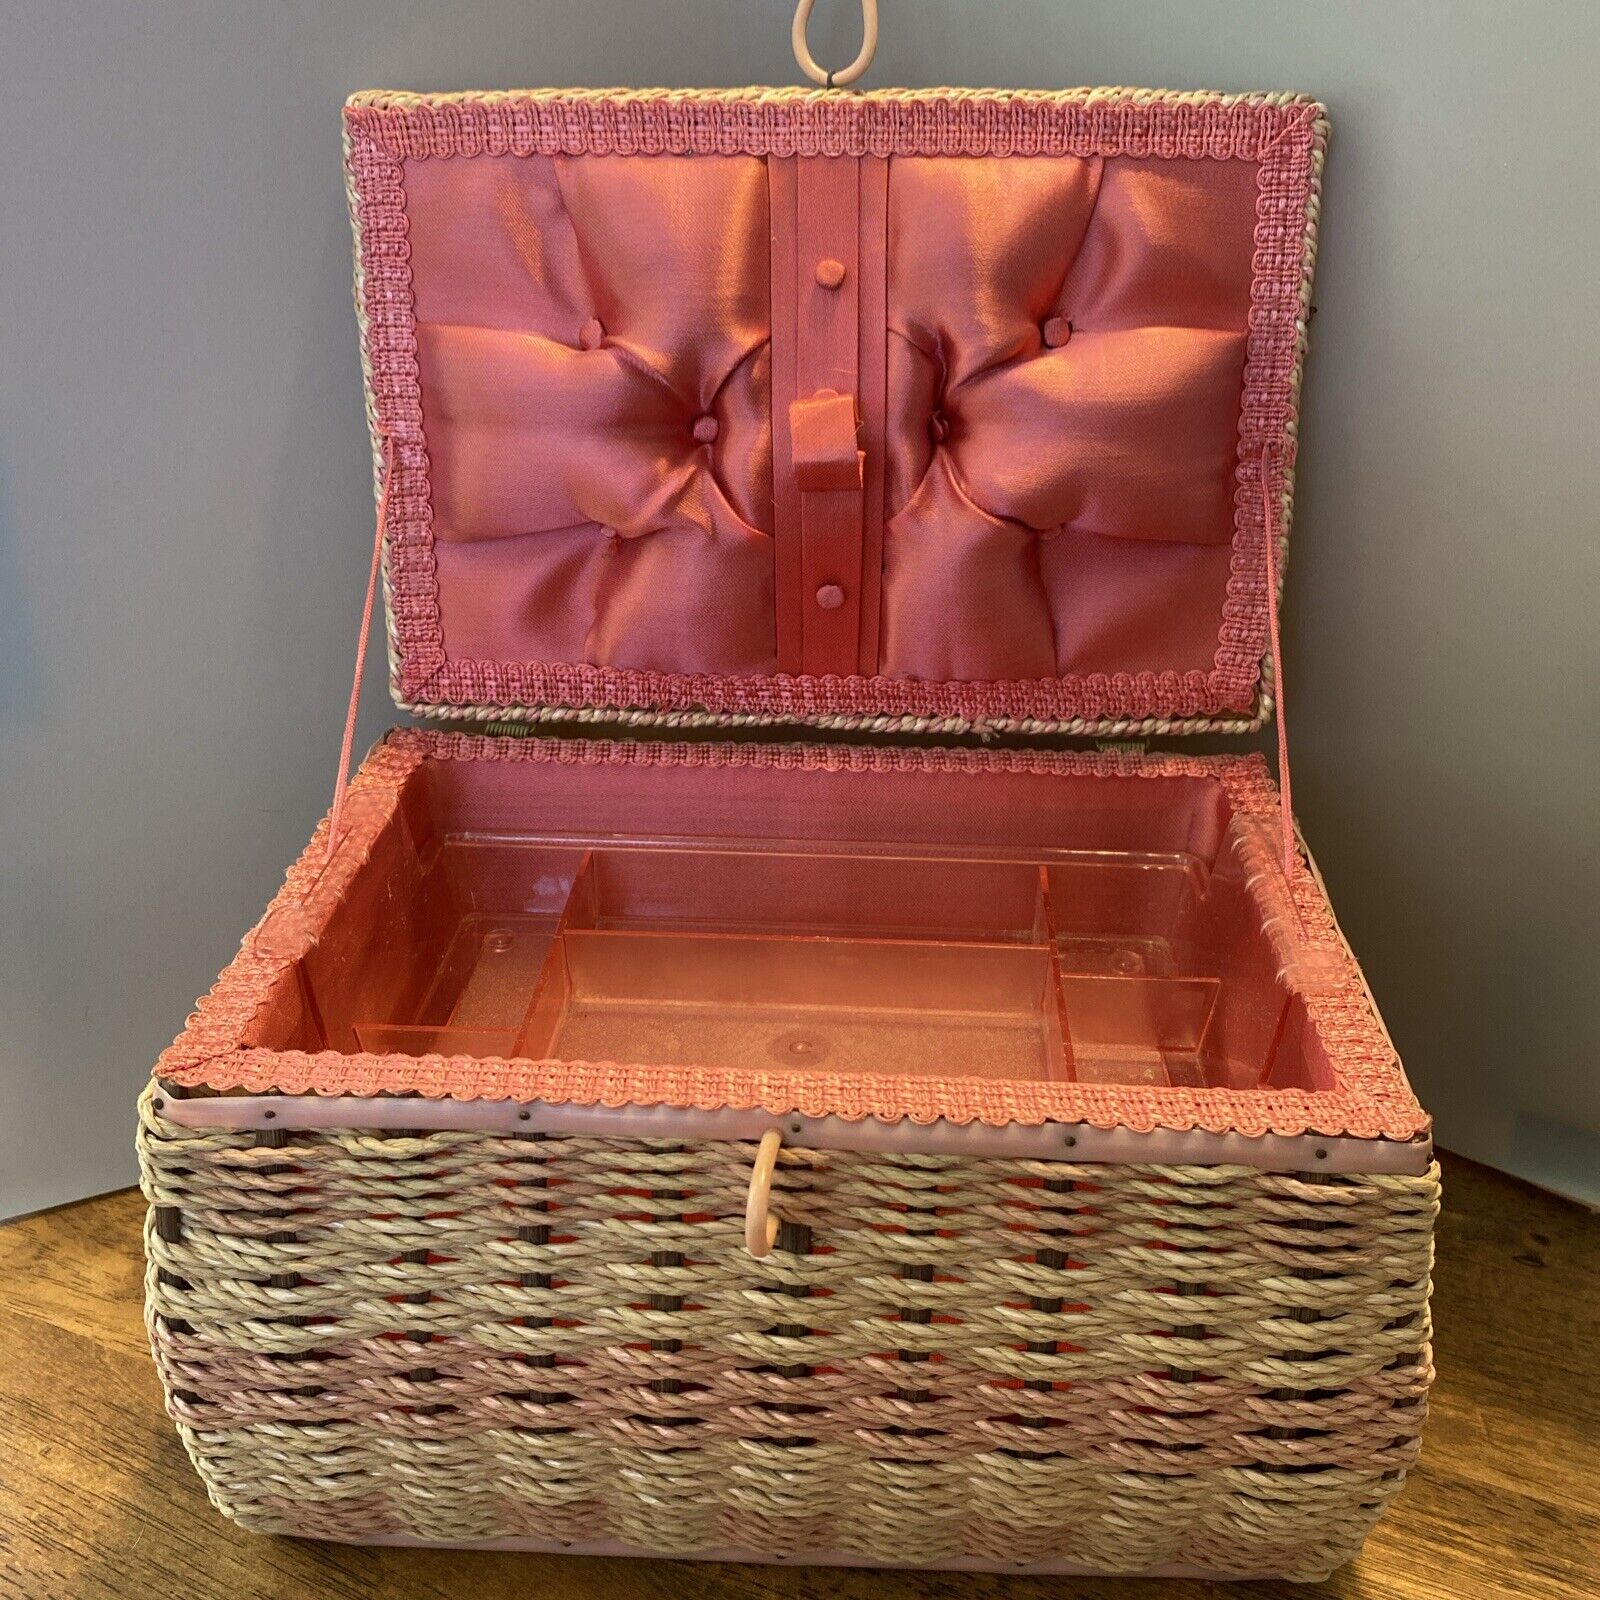 Vintage Japan PINK Wicker Sewing Basket With Pincushion Top - Tray - Handle